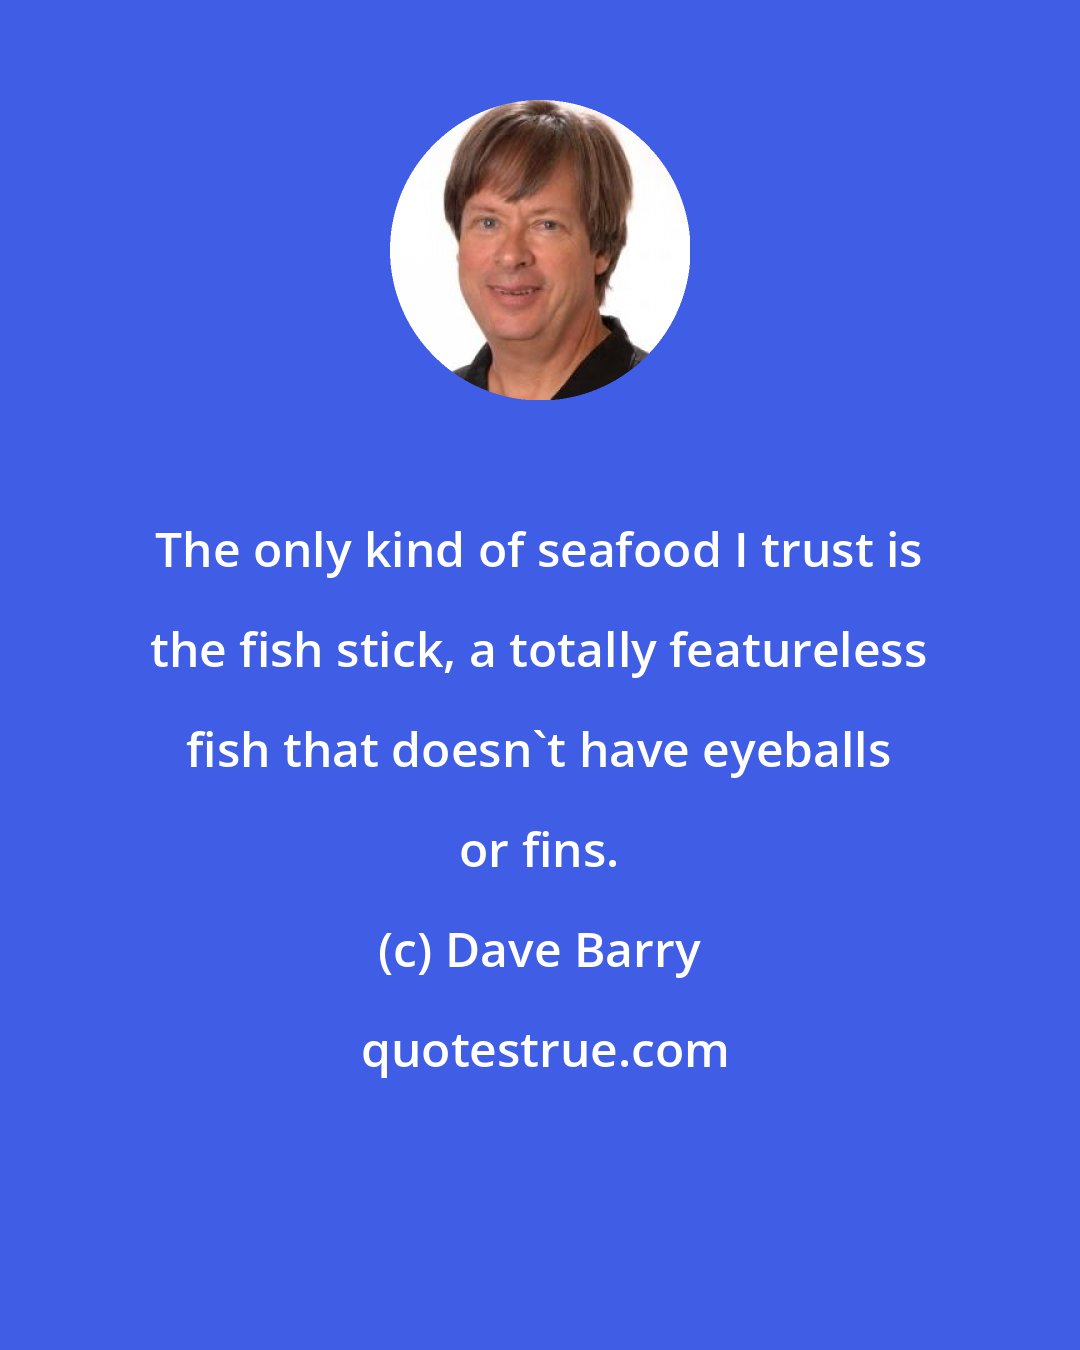 Dave Barry: The only kind of seafood I trust is the fish stick, a totally featureless fish that doesn't have eyeballs or fins.